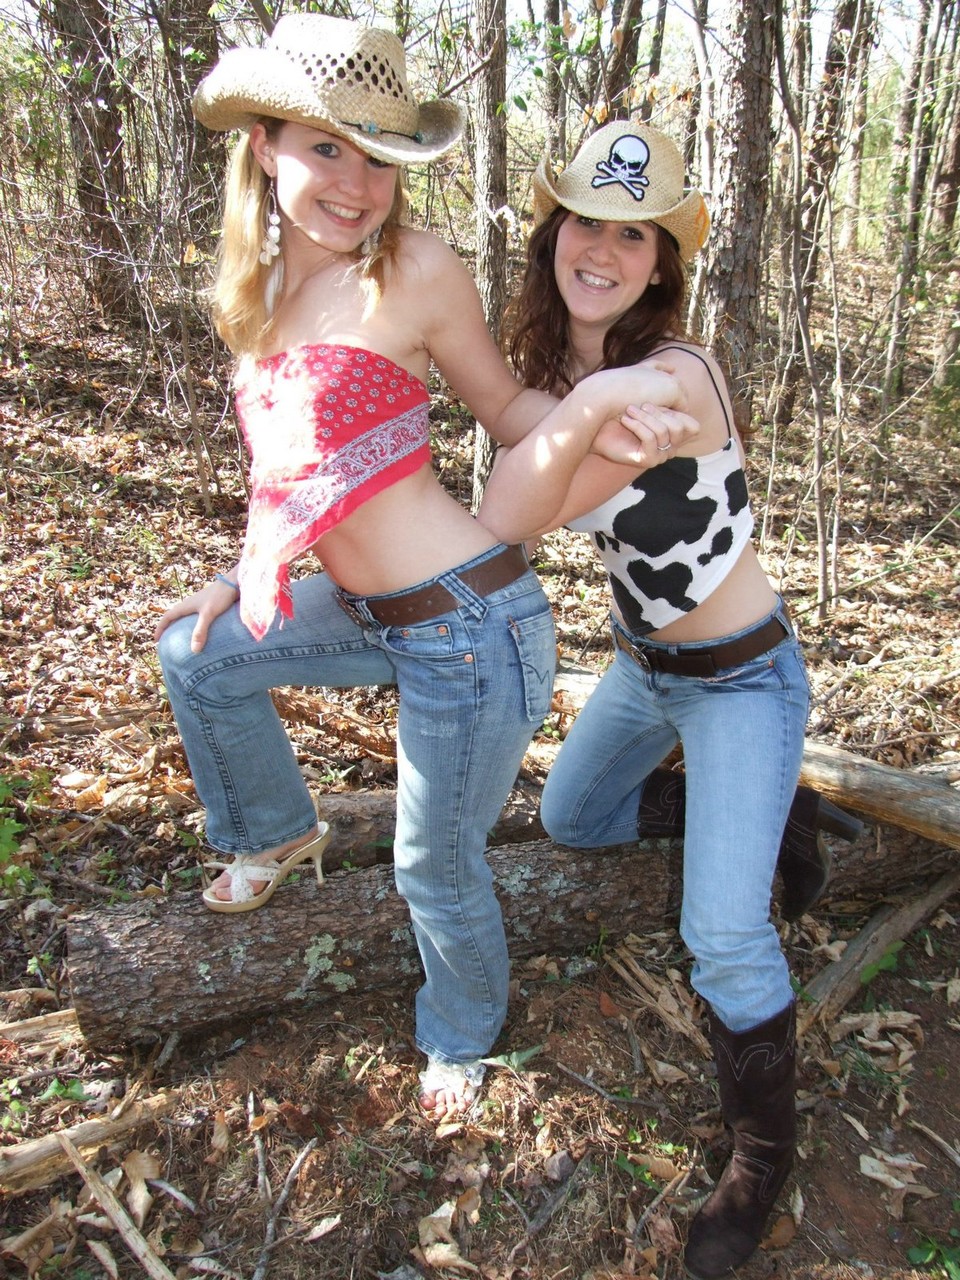 Cowgirl lesbians Kitty and Anna show their titties in the forest foto porno #427006705 | Teen Dreams Pics, Anna, Kitty, Jeans, porno mobile